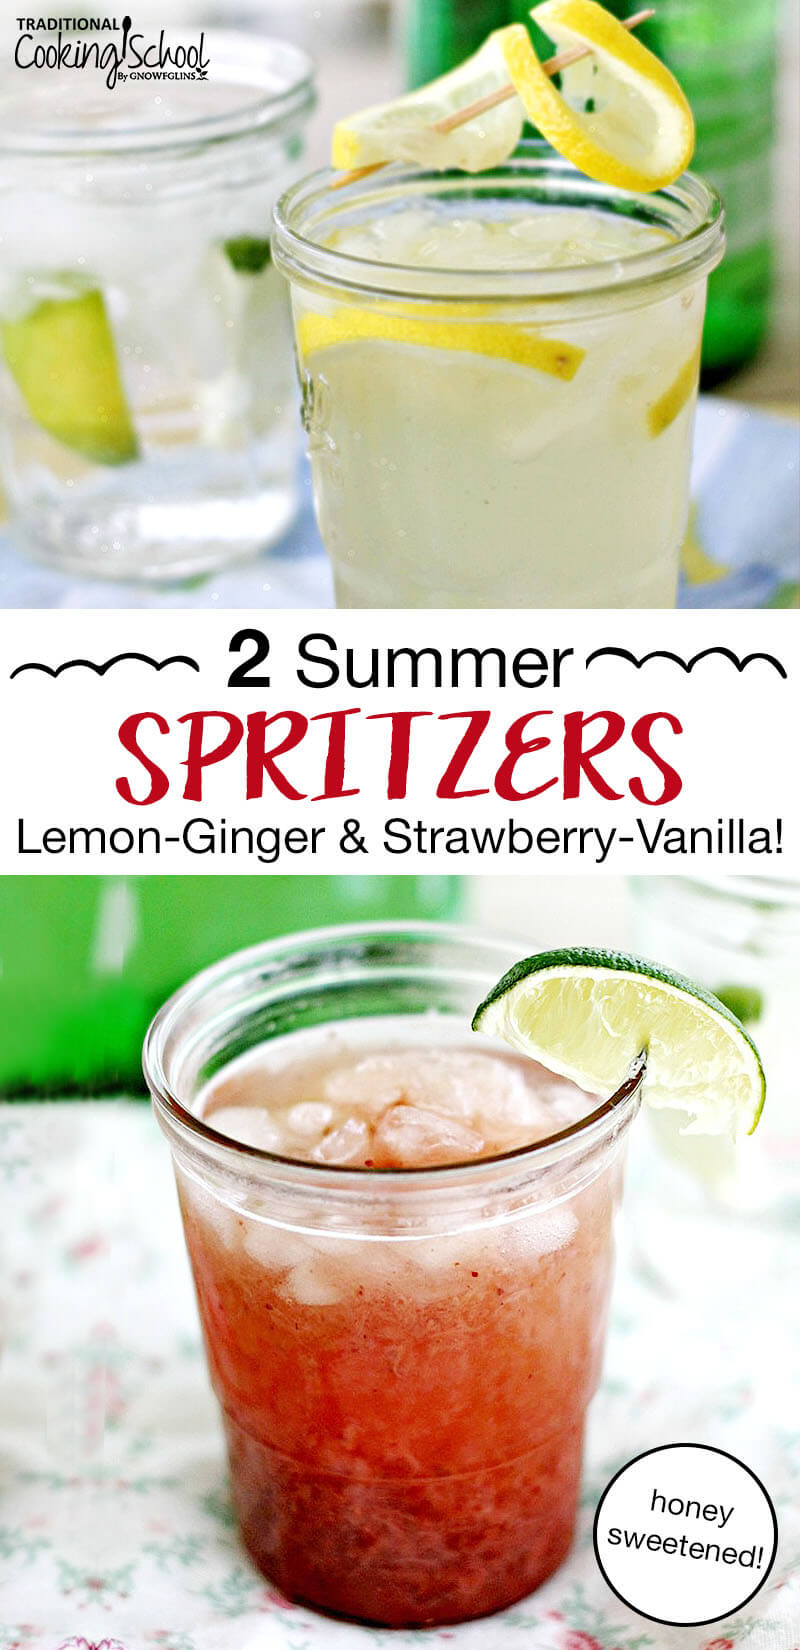 2 Summer Spritzers | I love water, but there are times when water can get rather boring. When I'm in the mood for something with pizzazz, I go for one of my homemade spritzers. I love a drink with a little bit of fizz! In fact, it was the only reason I ever drank soda (in my pre-real food days, of course). Now, I whip up a refreshing drink comprised of simple ingredients like fruit, honey syrup, and sparkling water. Yum! | TraditionalCookingSchool.com